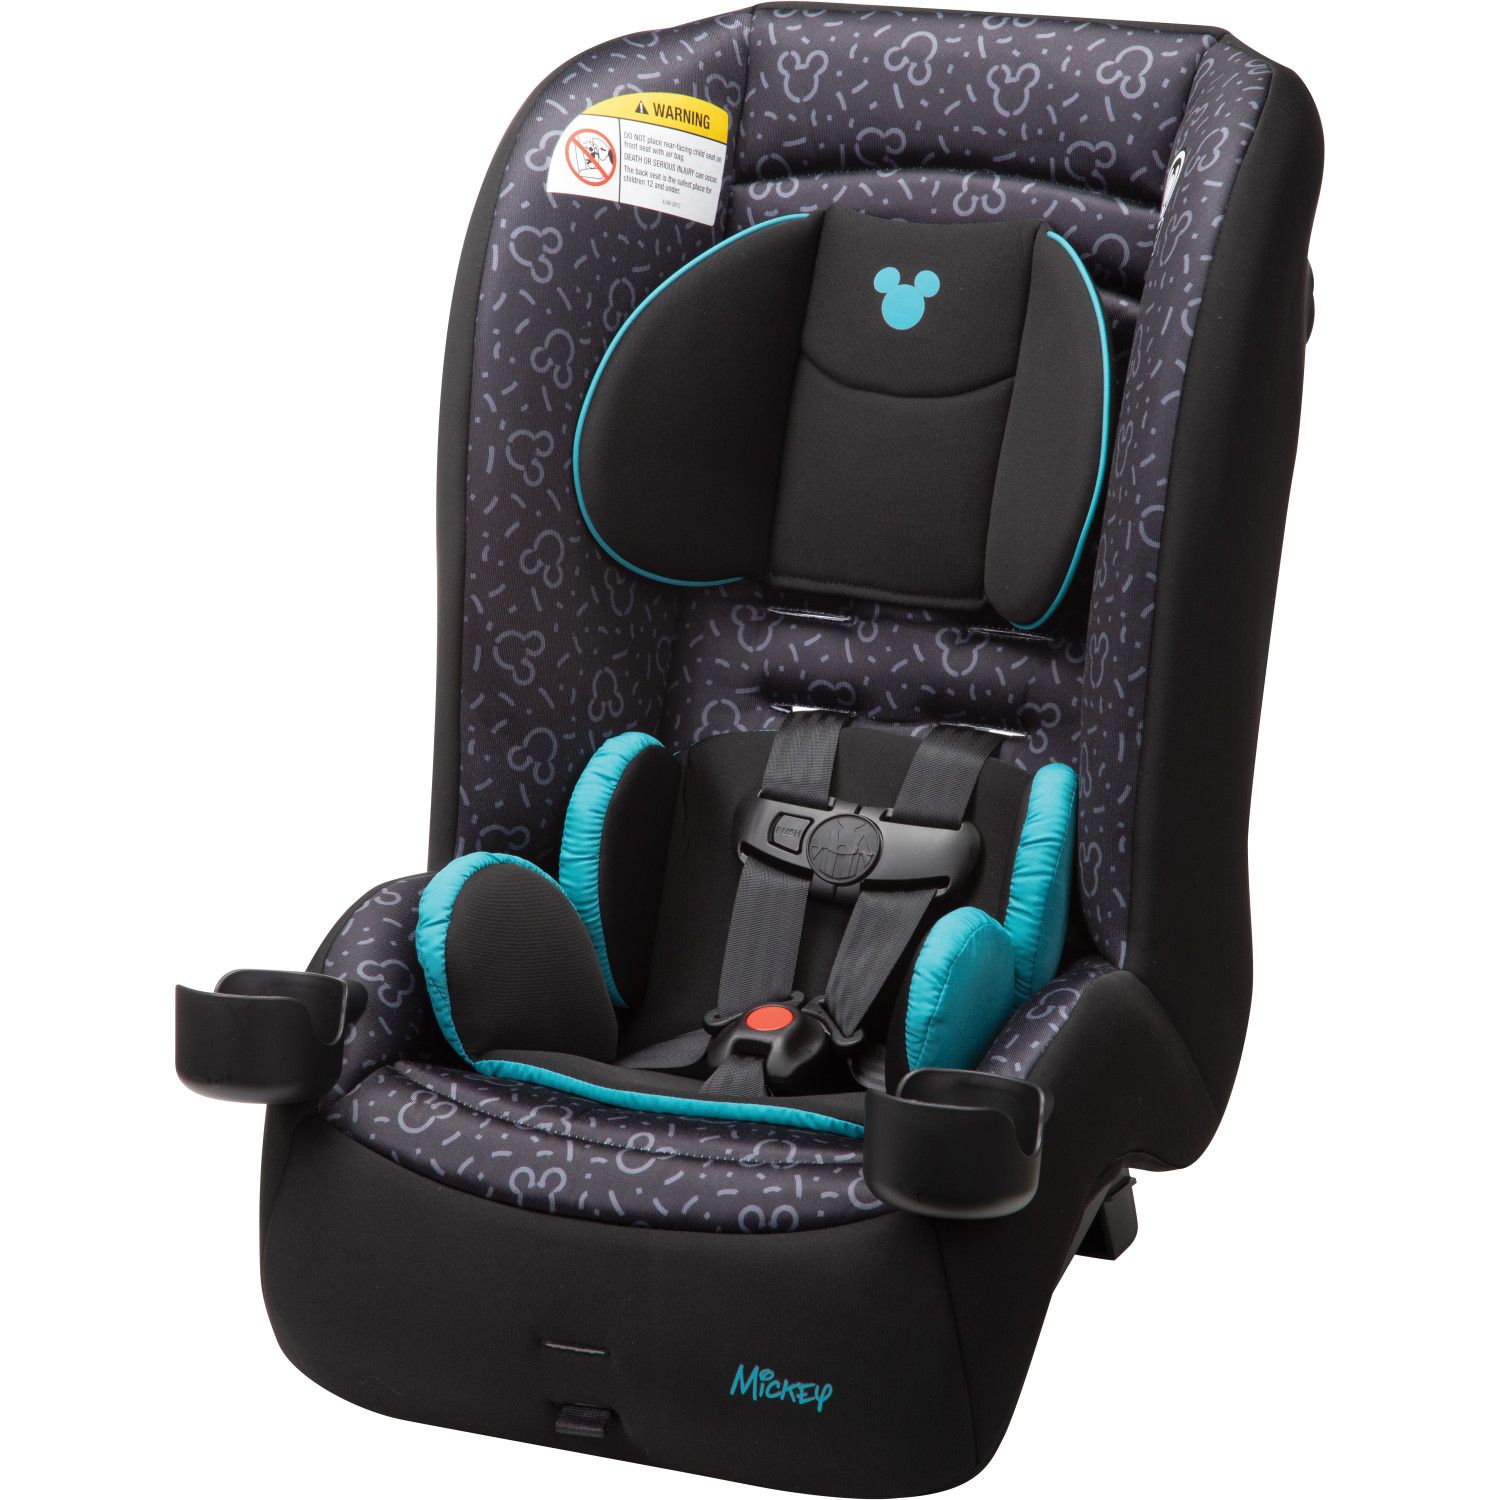 Image for Disney 's Mickey Mouse Baby Jive 2-in-1 Convertible Car Seat at Kohl's.